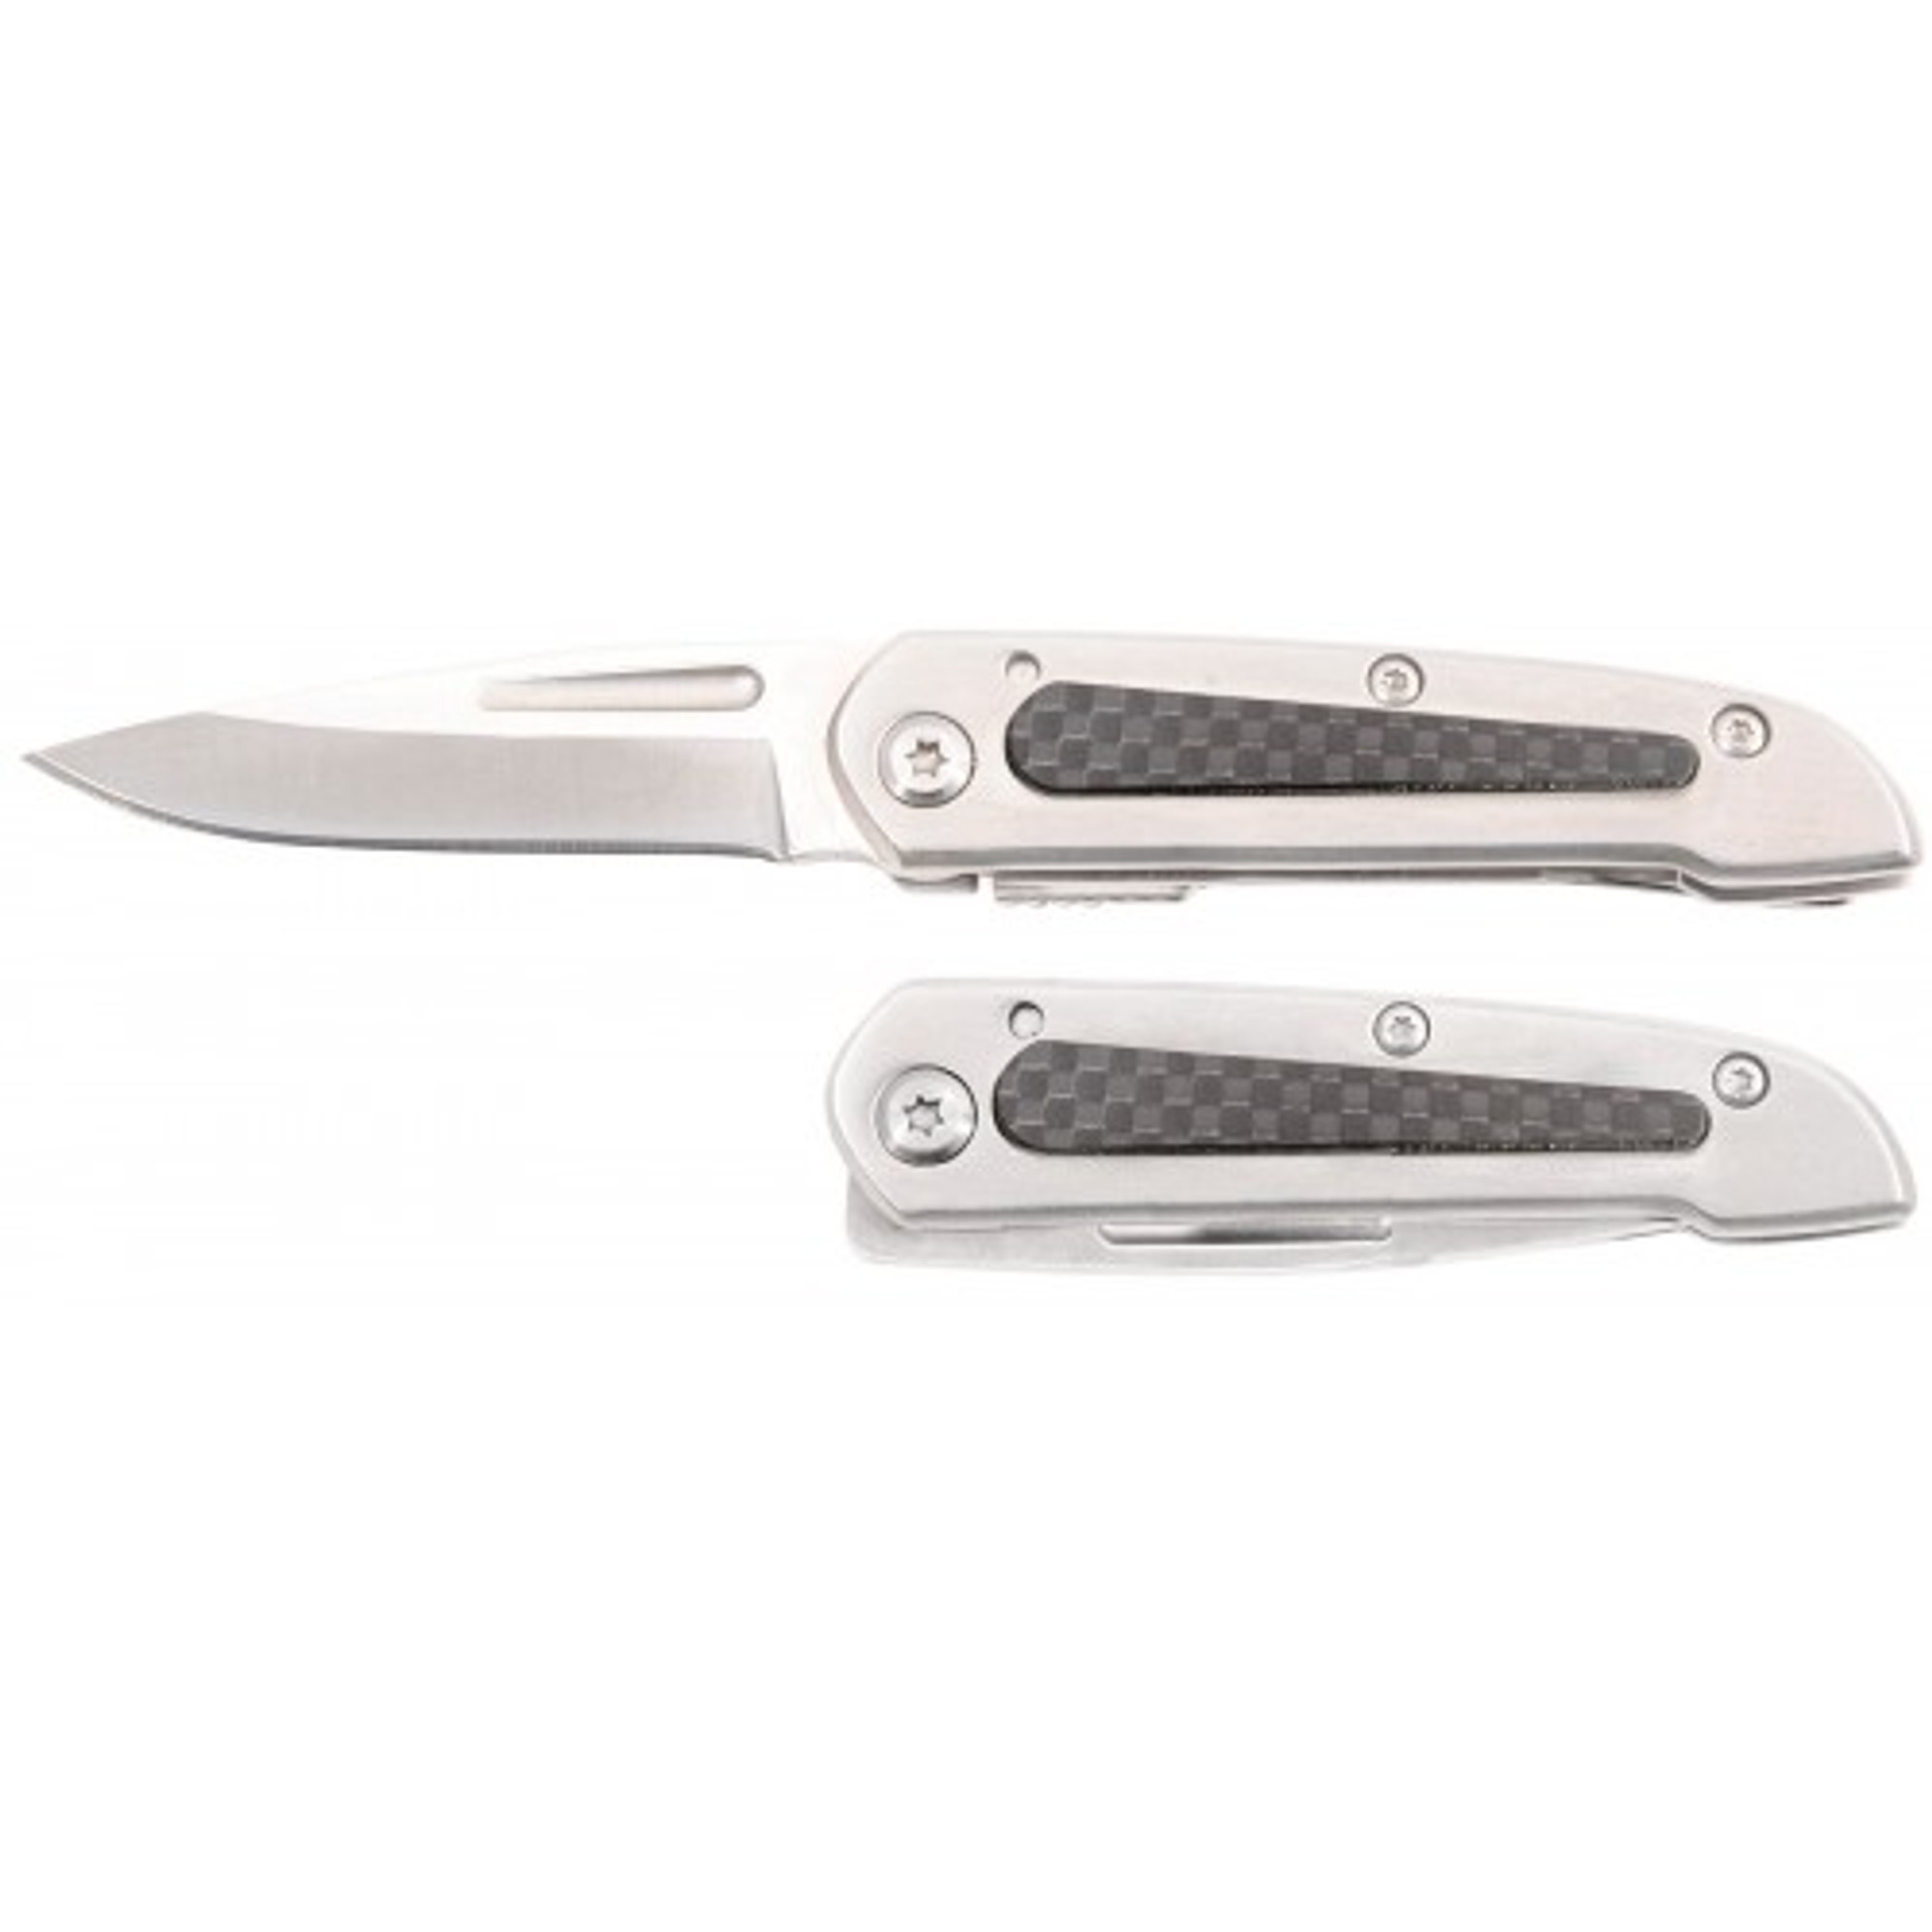 RUKO RUK0170CF, 440A, 2-1/4" Folding Blade Pocket Knife, Stainless Steel Handle w/Carbon Fiber Acrylic Inlay, boxed